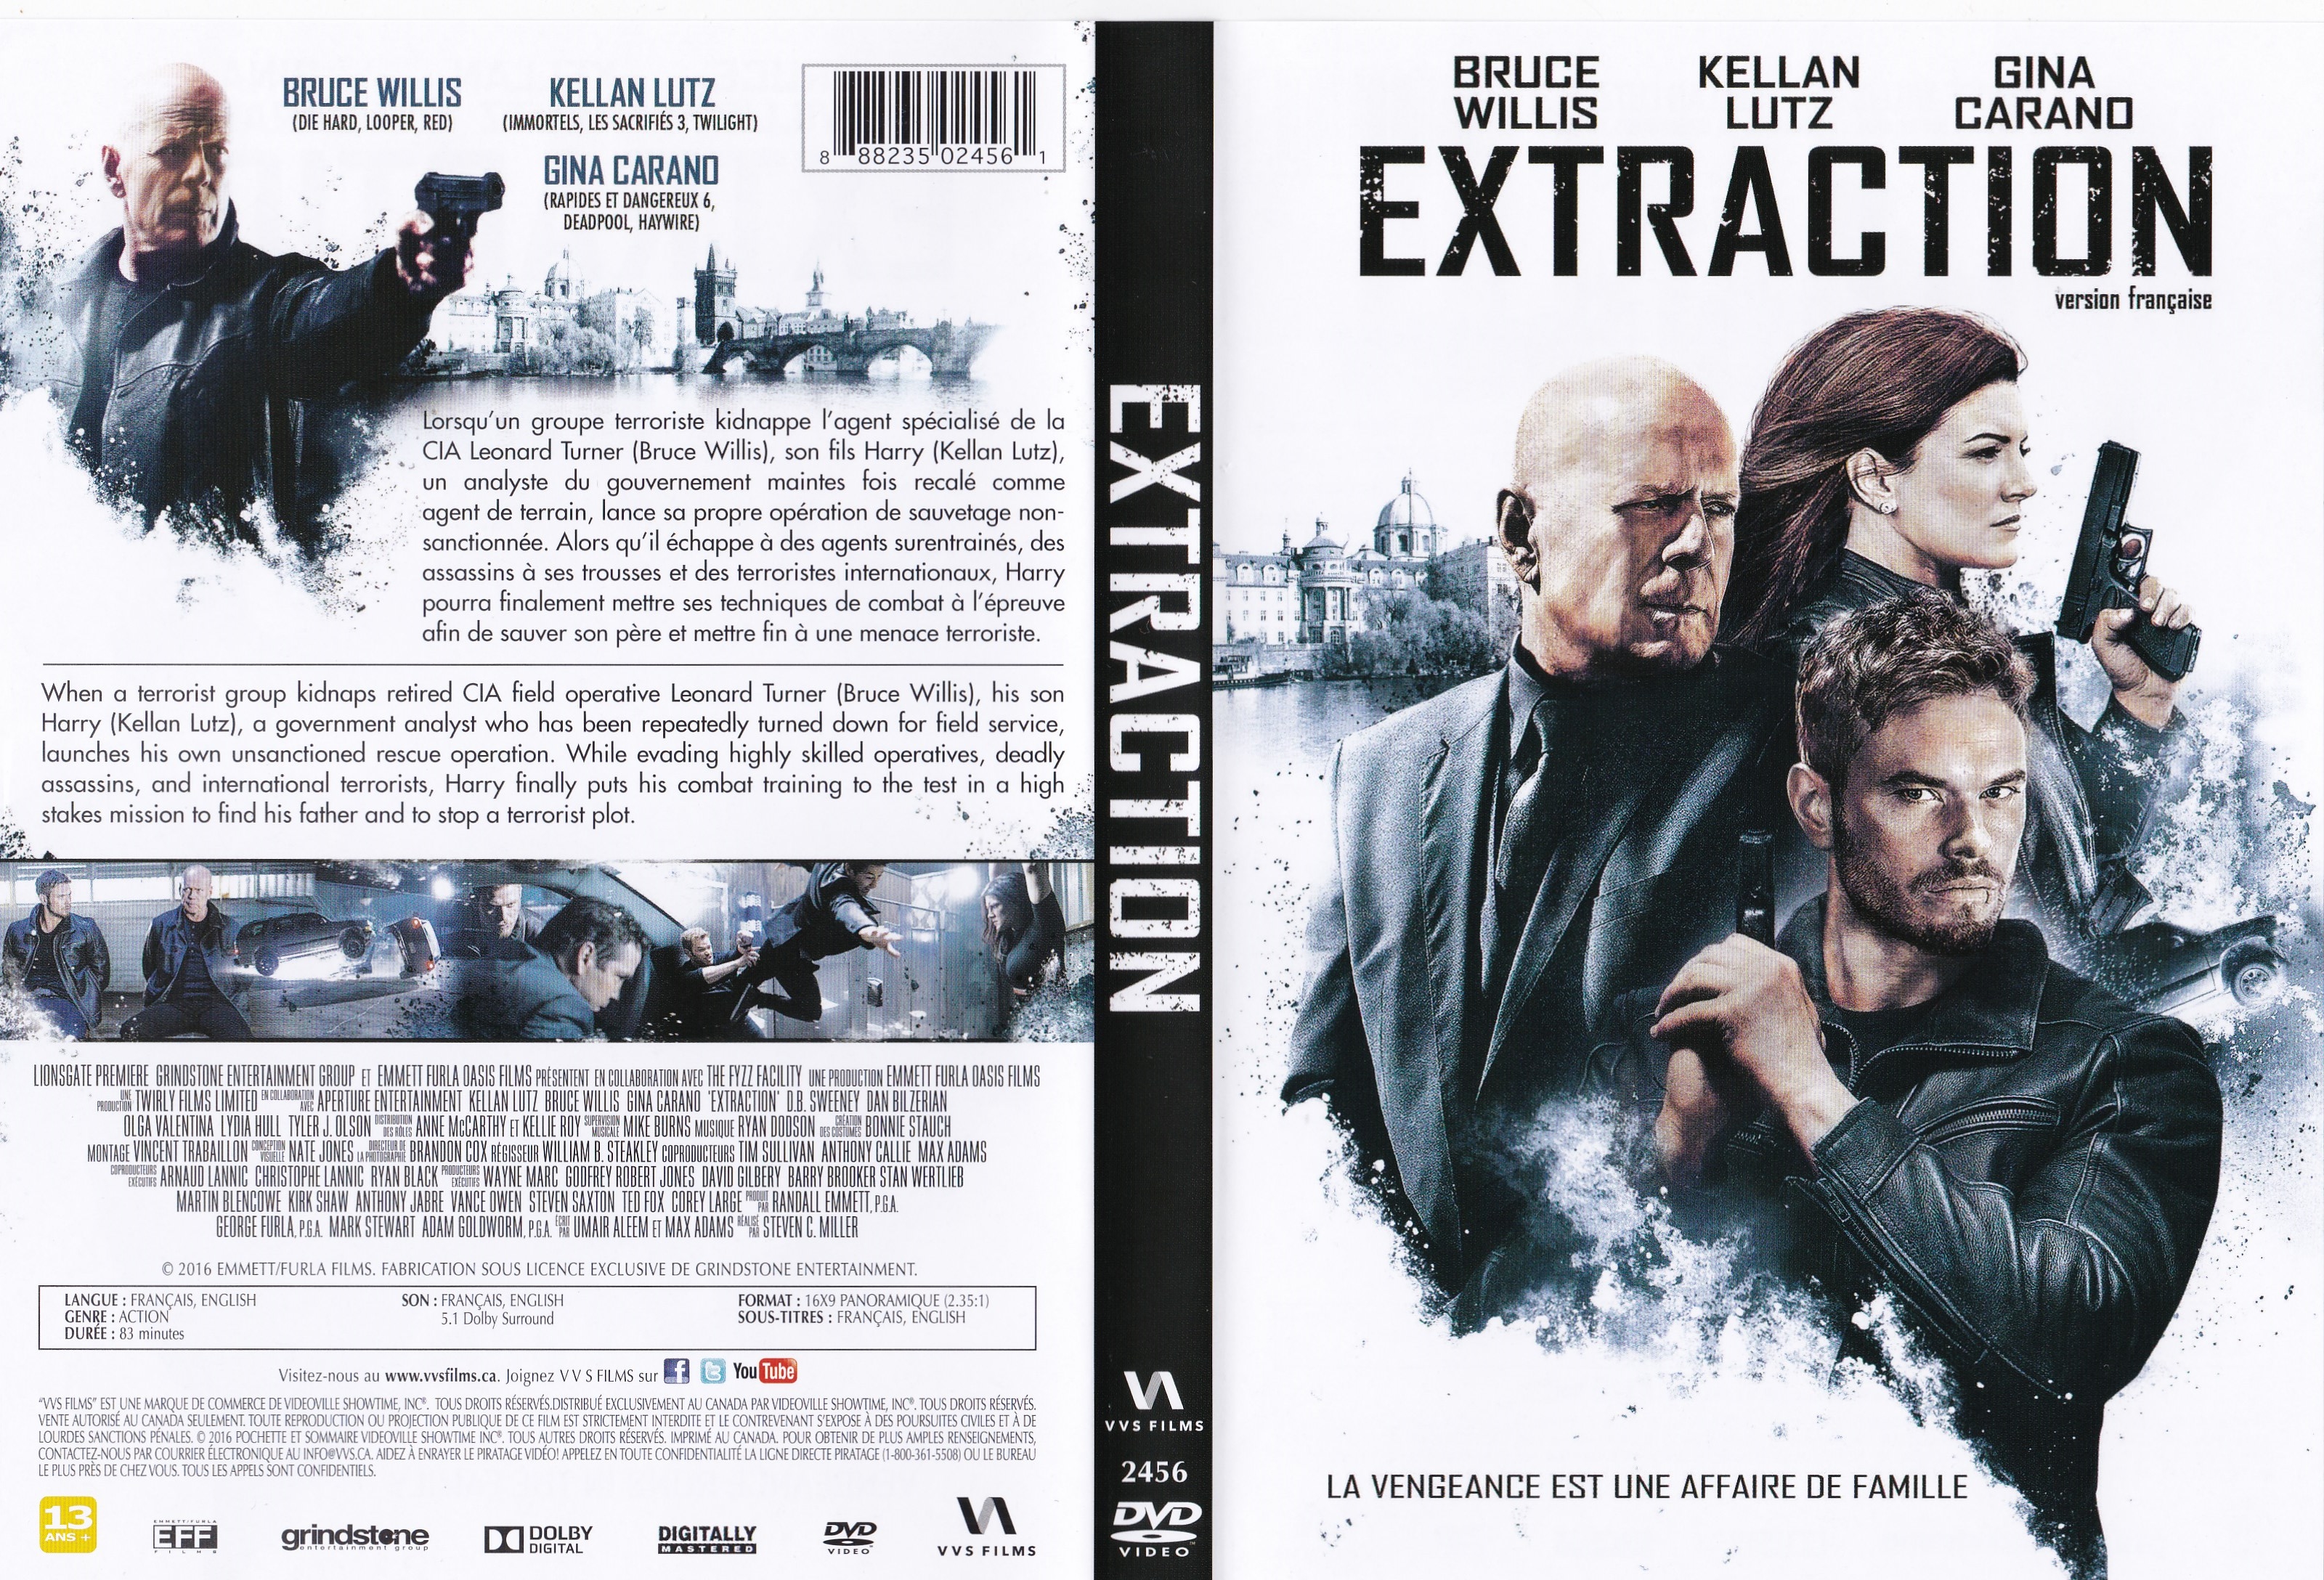 Jaquette DVD Extraction (2016) (canadienne)